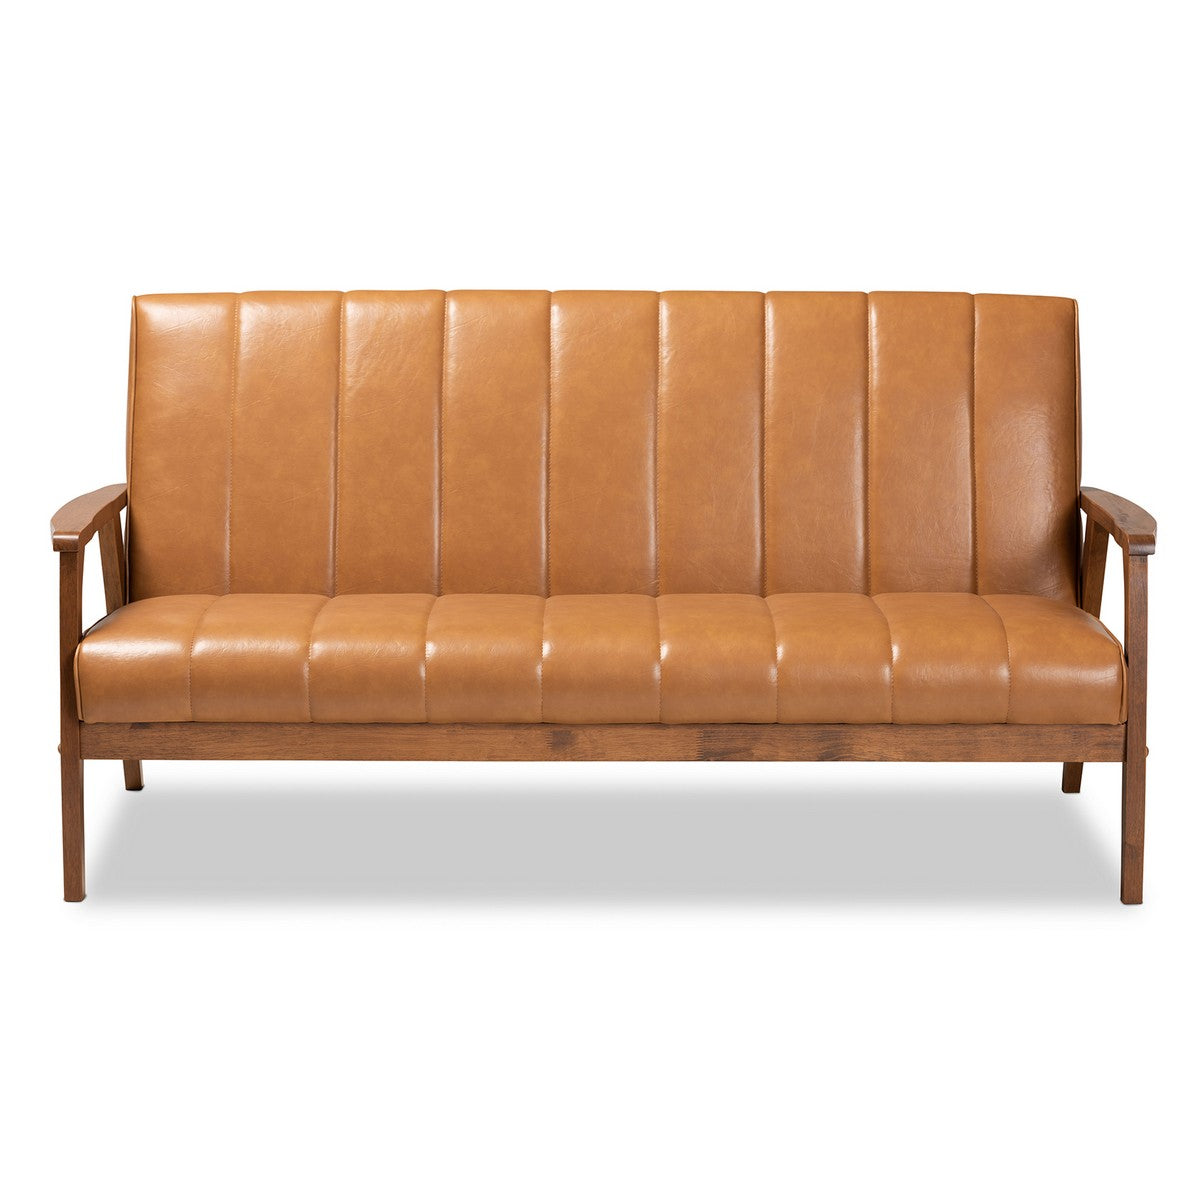 Baxton Studio Nikko Mid-century Modern Tan Faux Leather Upholstered and Walnut Brown finished Wood Sofa